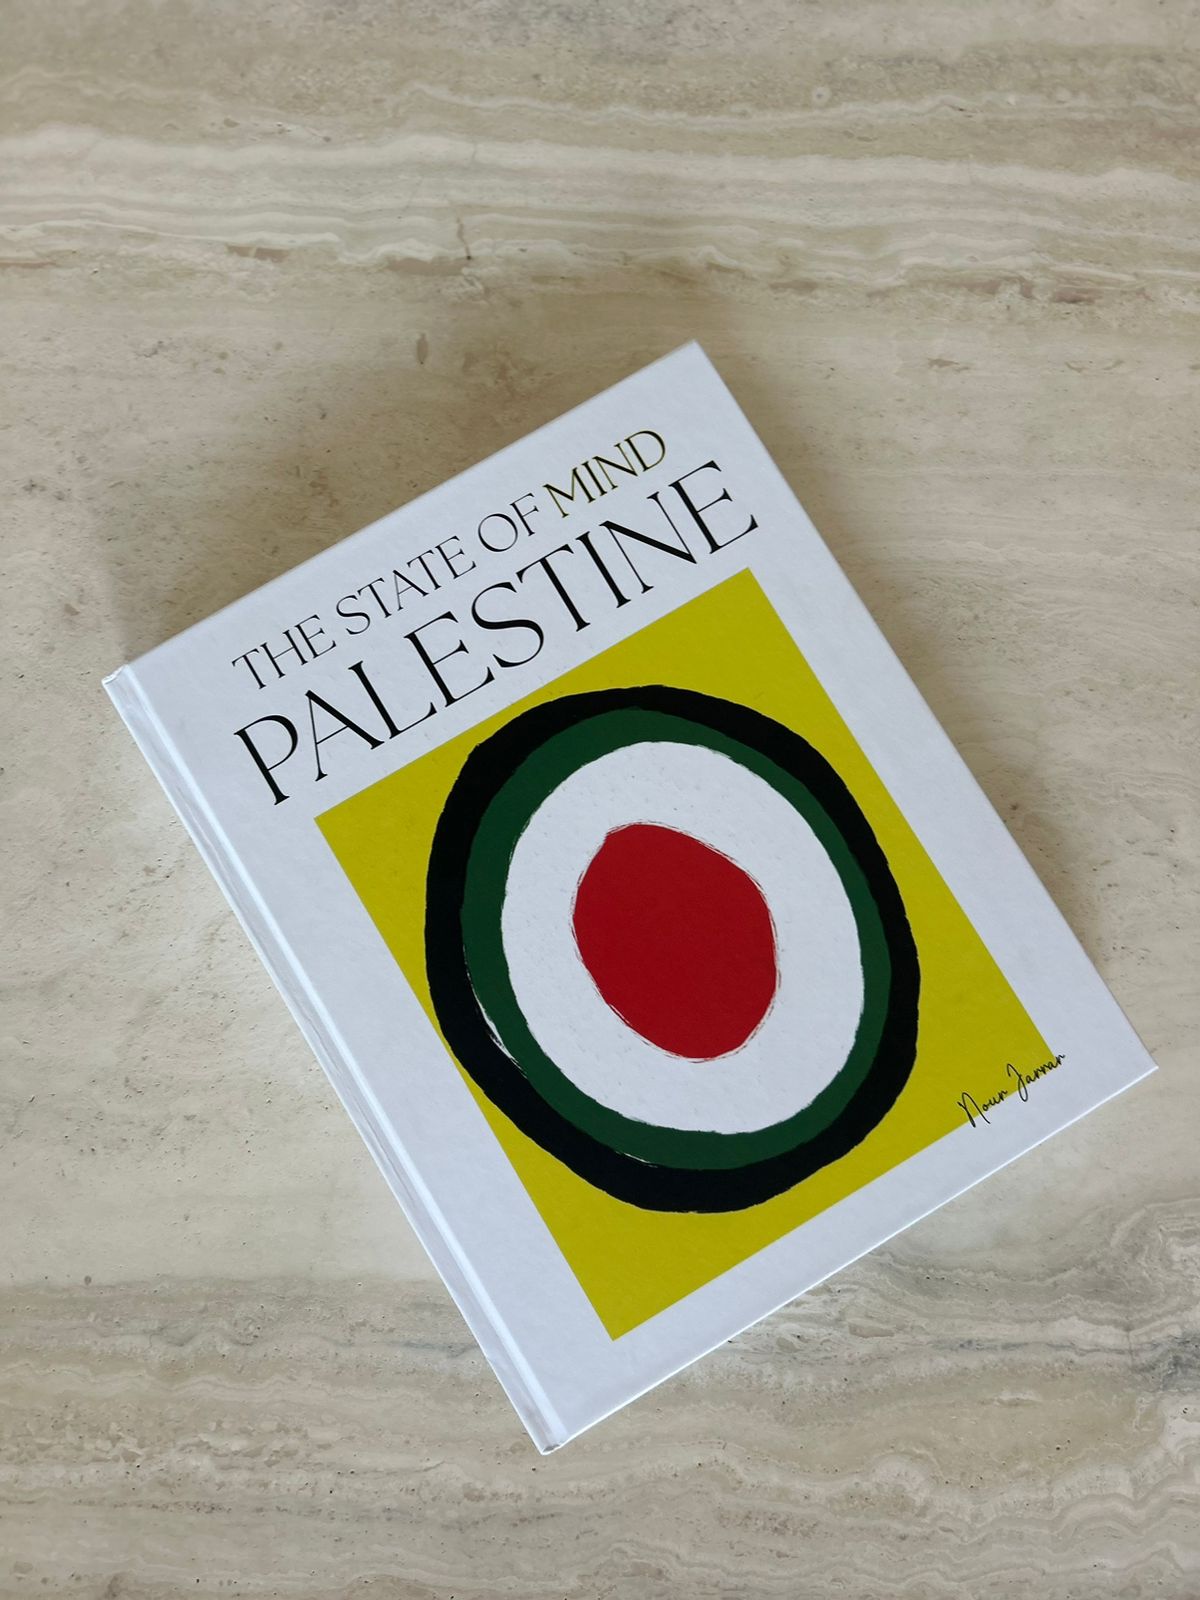 The State of Mind Palestine